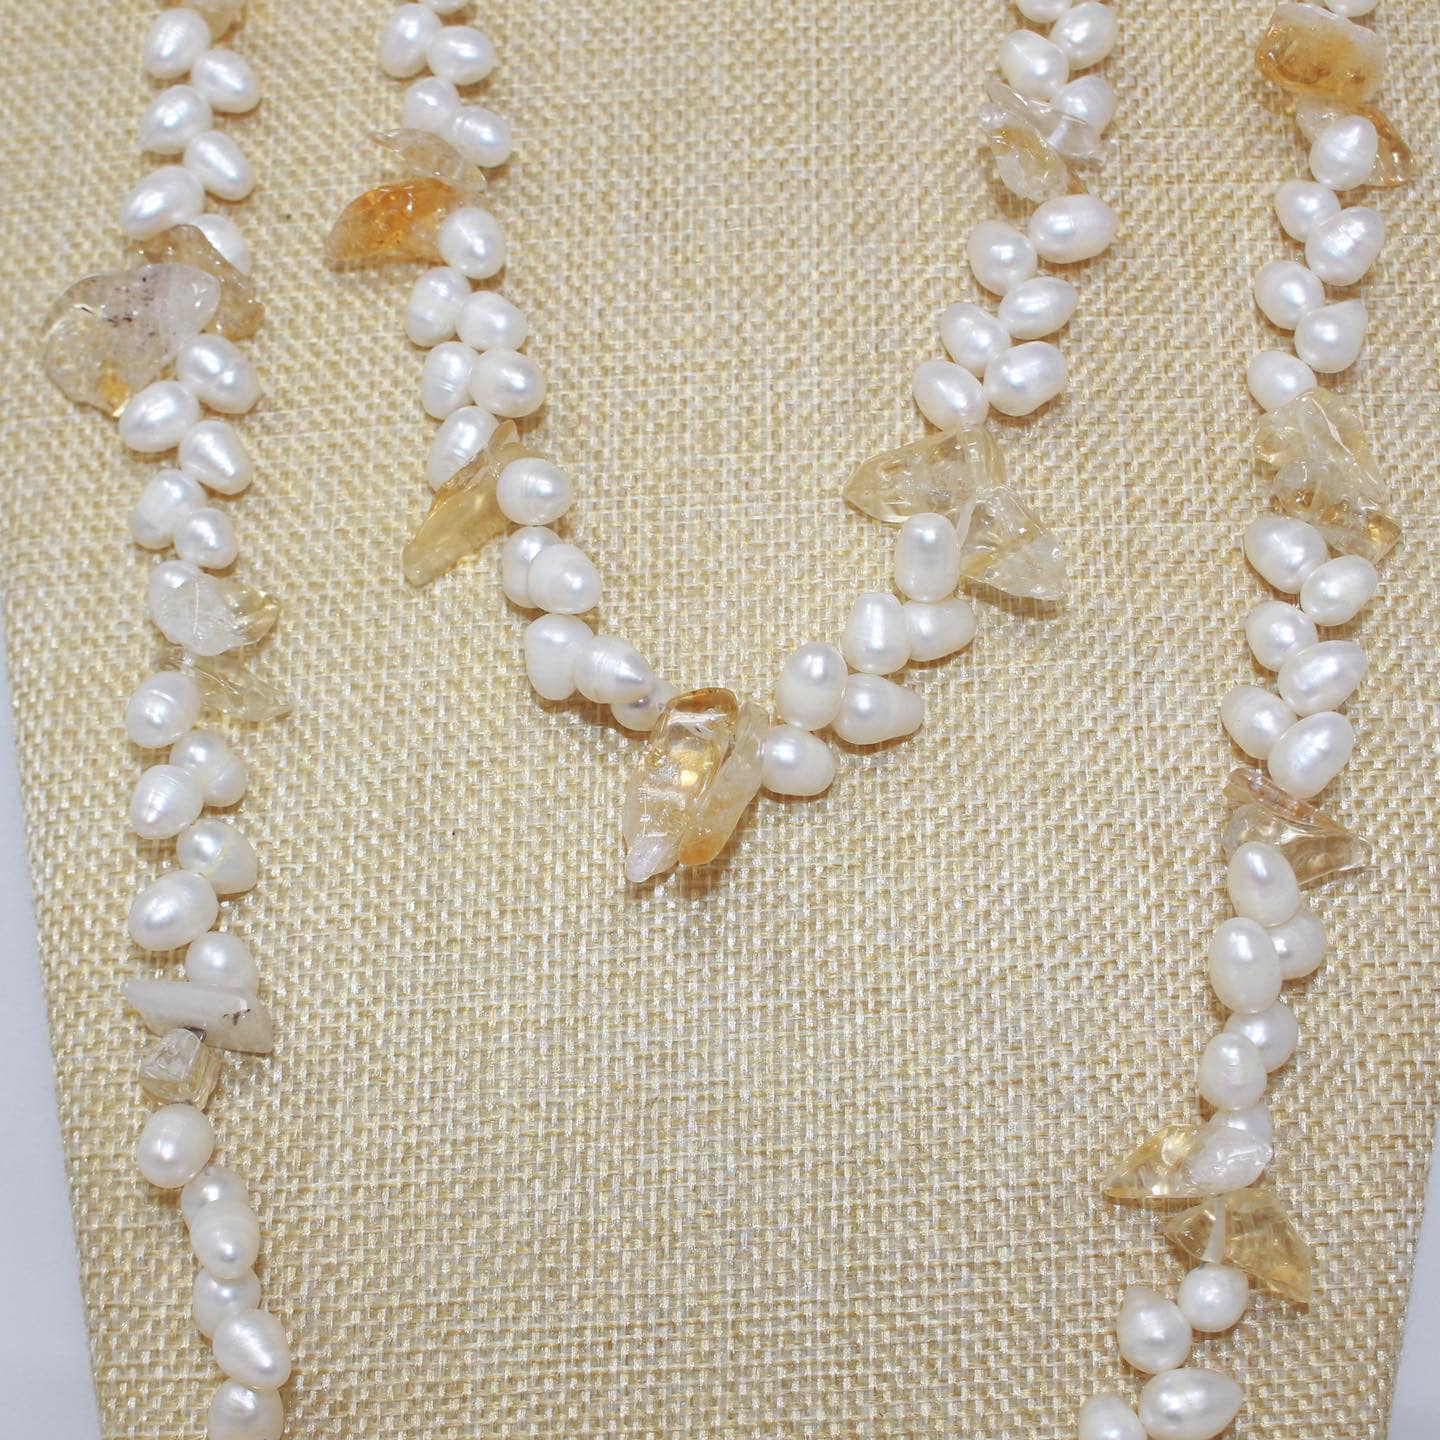 JEWELRY 39929 Pearl and Quartz Necklace Earrings Set c